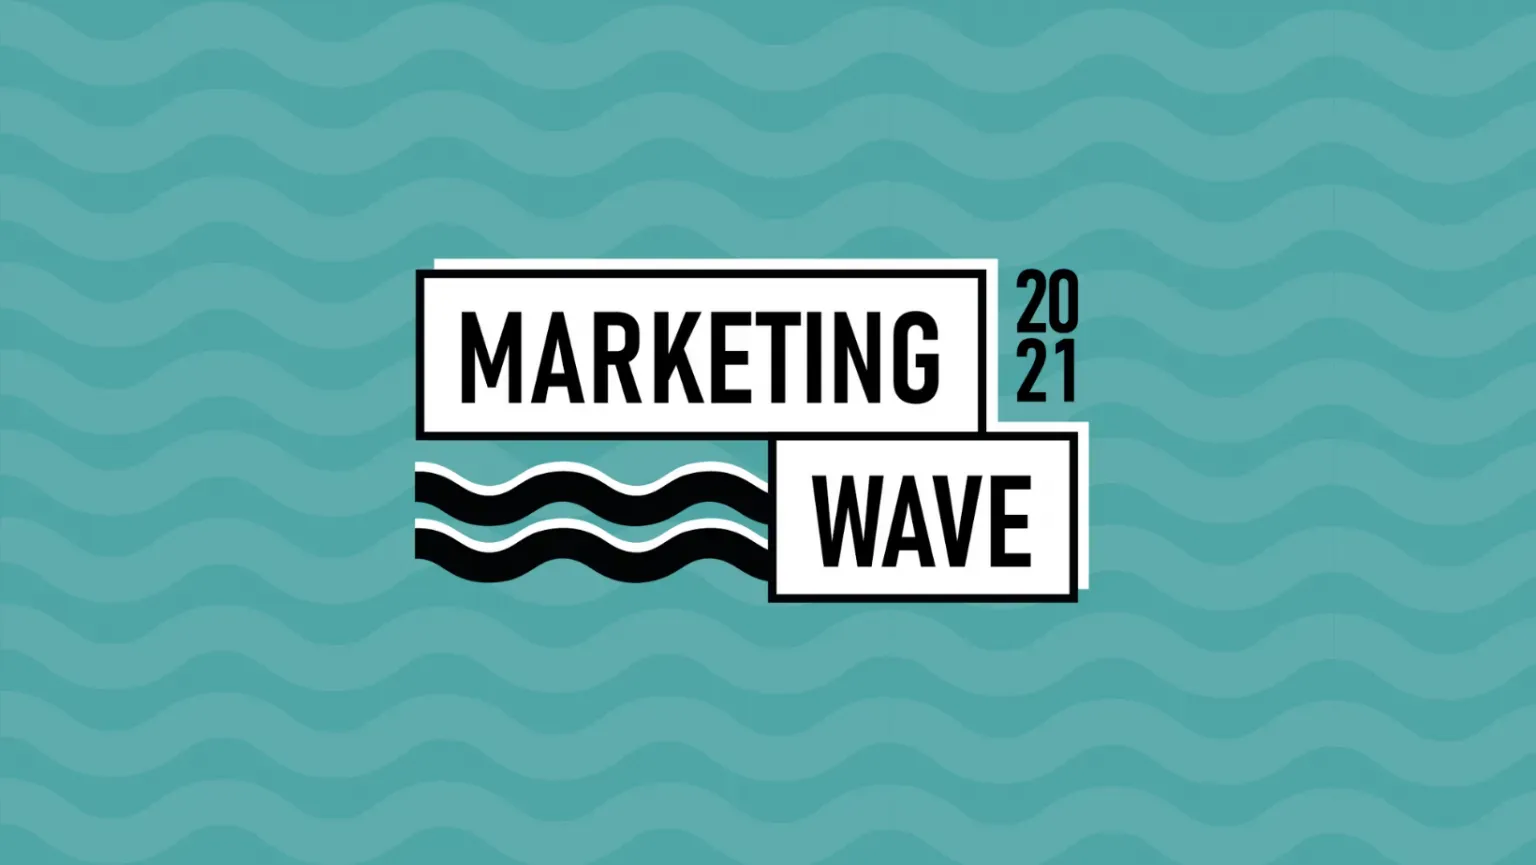 Behind the Scenes of Marketing Wave